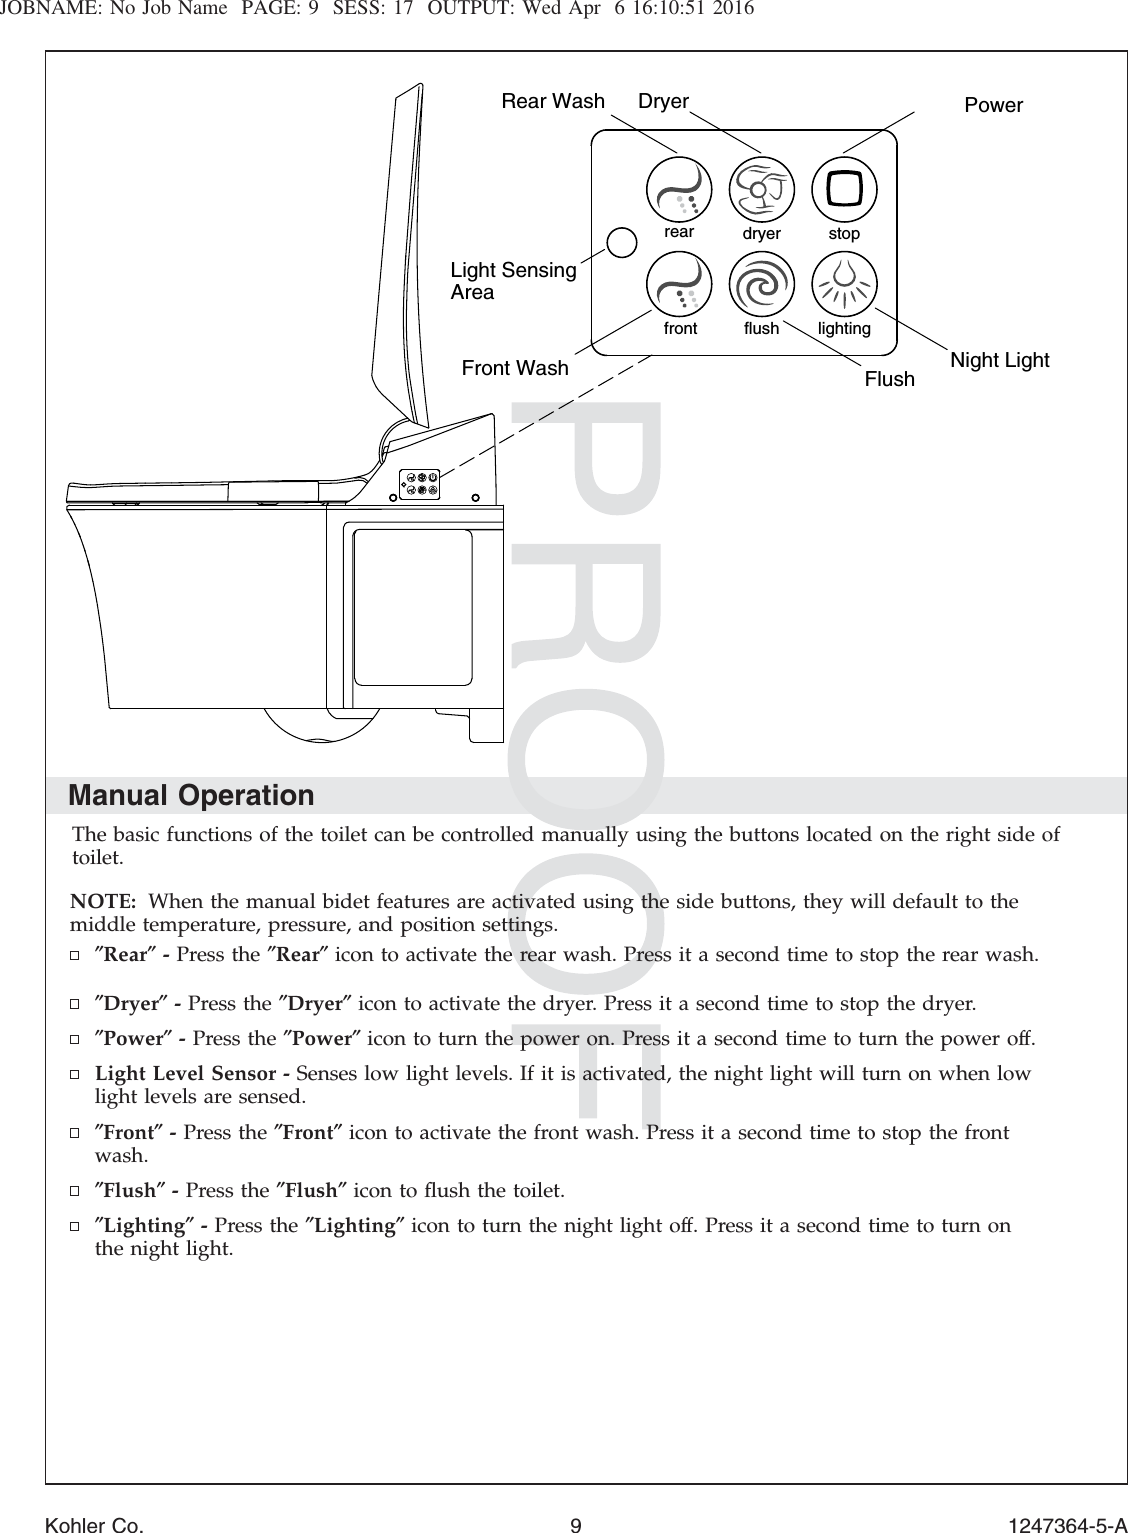 JOBNAME: No Job Name PAGE: 9 SESS: 17 OUTPUT: Wed Apr 6 16:10:51 2016Manual OperationThe basic functions of the toilet can be controlled manually using the buttons located on the right side oftoilet.NOTE: When the manual bidet features are activated using the side buttons, they will default to themiddle temperature, pressure, and position settings.″Rear″-Press the ″Rear″icon to activate the rear wash. Press it a second time to stop the rear wash.″Dryer″-Press the ″Dryer″icon to activate the dryer. Press it a second time to stop the dryer.″Power″-Press the ″Power″icon to turn the power on. Press it a second time to turn the power off.Light Level Sensor - Senses low light levels. If it is activated, the night light will turn on when lowlight levels are sensed.″Front″-Press the ″Front″icon to activate the front wash. Press it a second time to stop the frontwash.″Flush″-Press the ″Flush″icon to ﬂush the toilet.″Lighting″-Press the ″Lighting″icon to turn the night light off. Press it a second time to turn onthe night light.flush lightingfrontstopdryerrearLight Sensing AreaRear Wash  Dryer PowerNight Light Flush Front WashKohler Co. 9 1247364-5-A